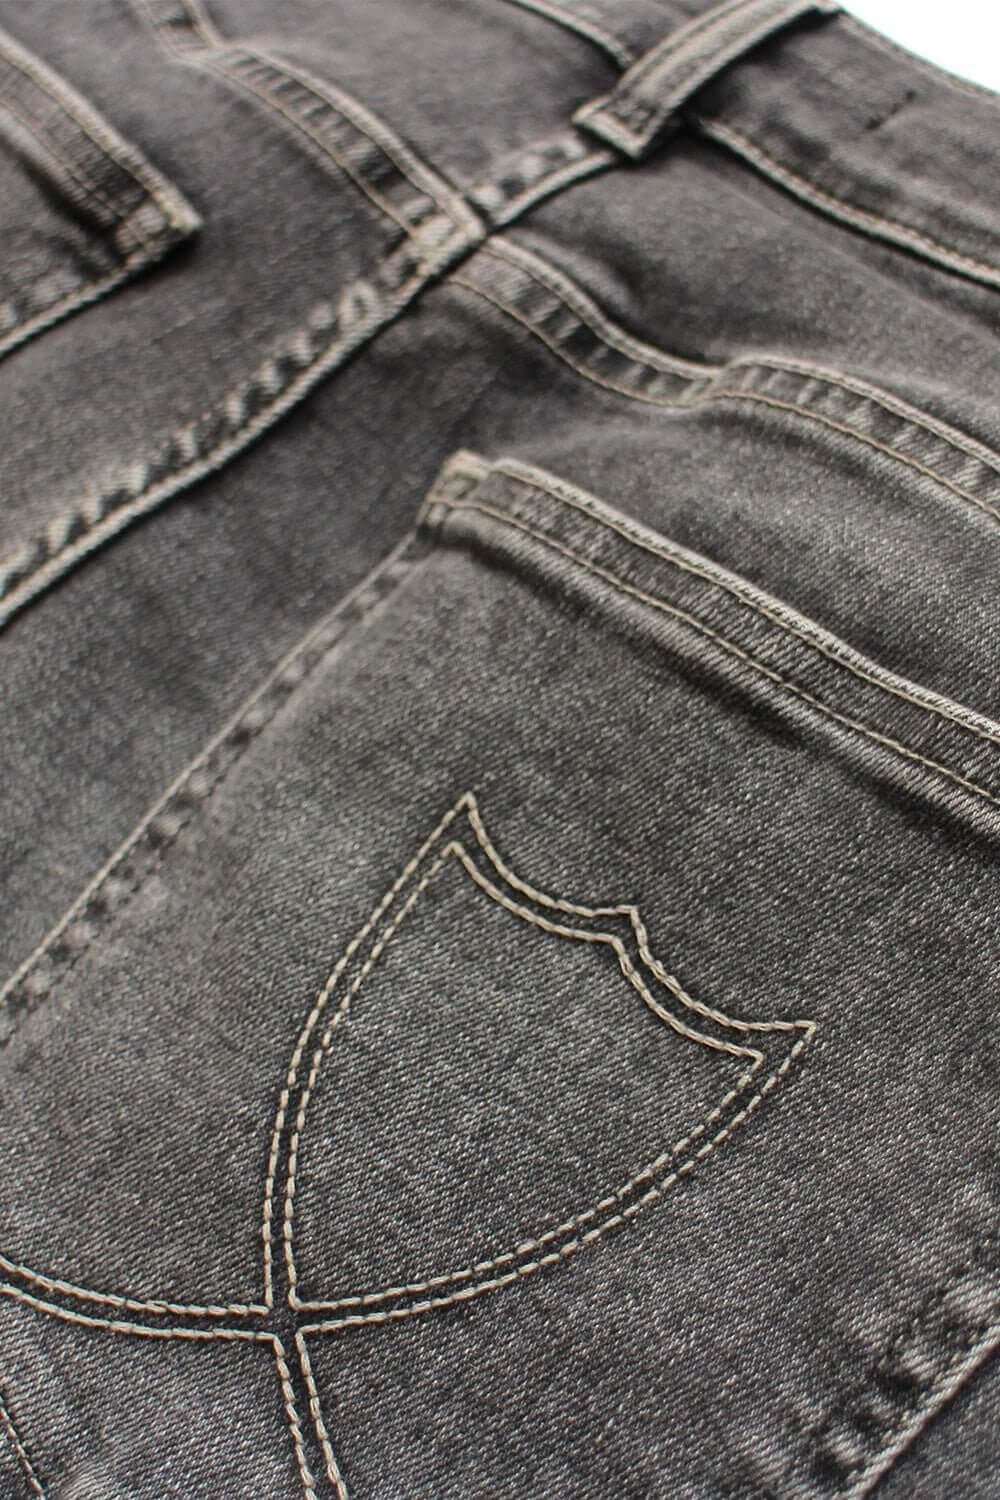 BOOTCUT WOMAN Bootcut fit jeans, 5 pockets, hidden front zip closure. 100% cotton. Made in Italy. GREY HTC LOS ANGELES